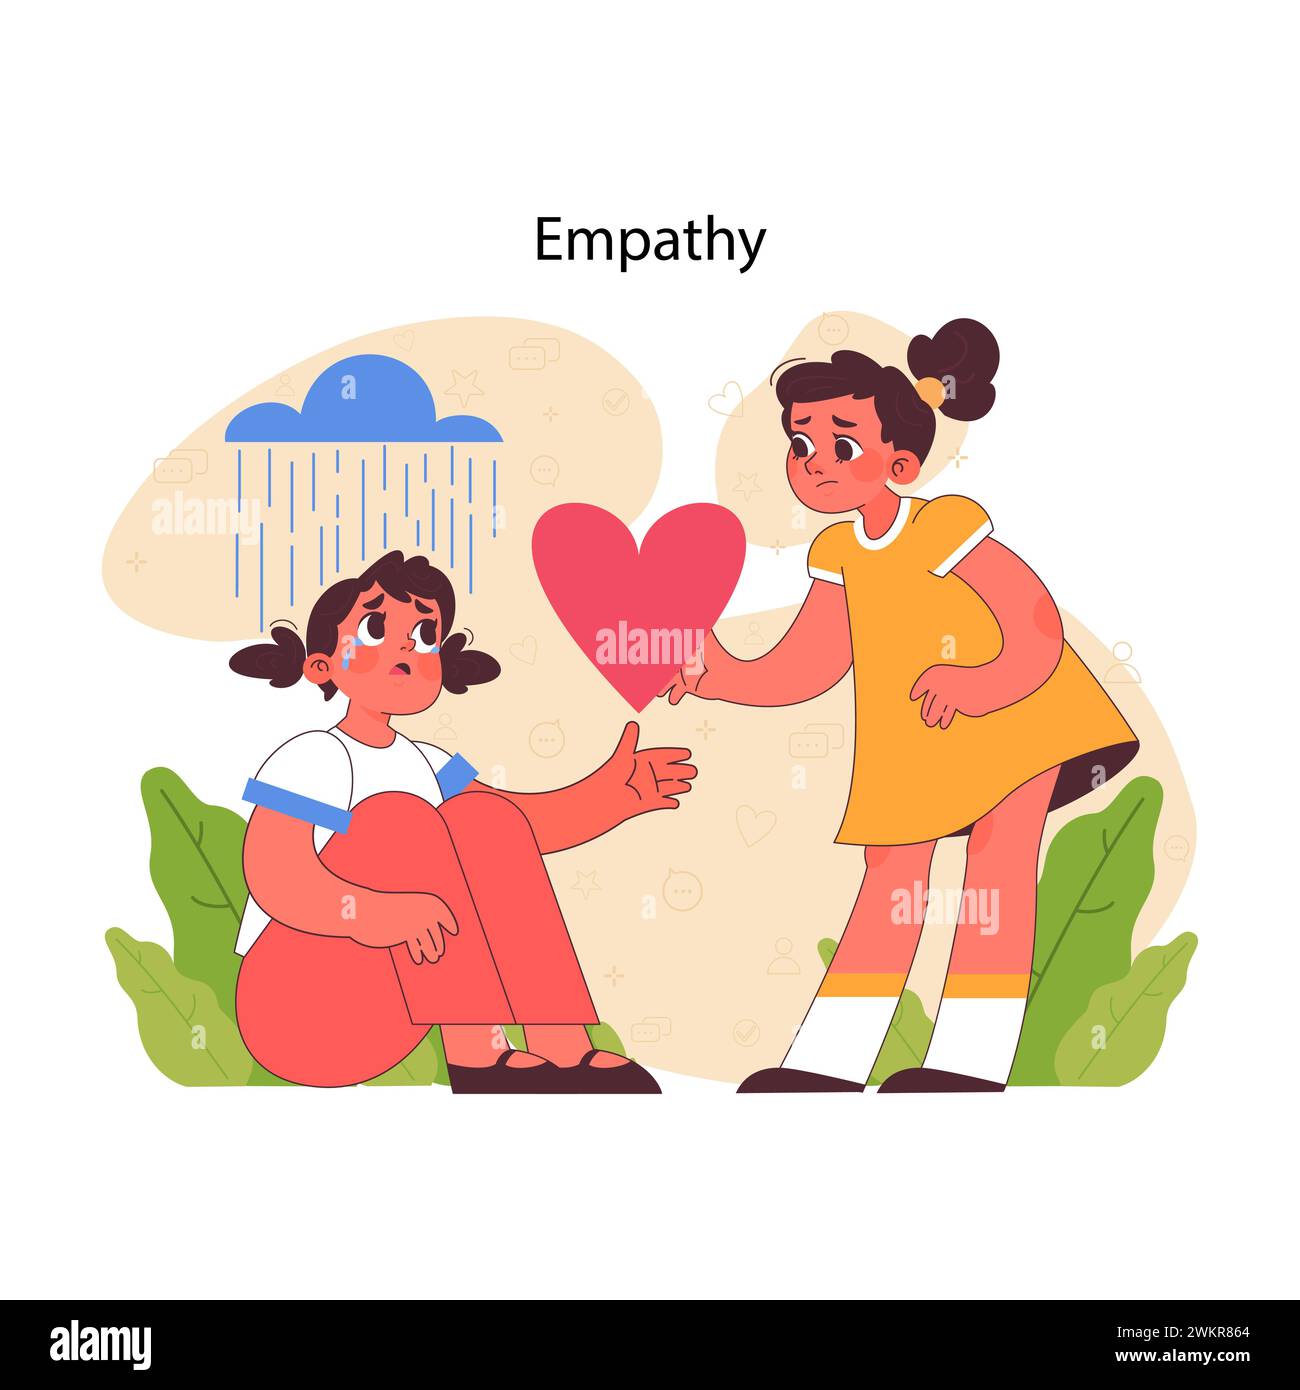 Empathy concept. Comforting scene depicting girl offering heart of support to friend in distress. Essence of compassion visualized. Flat vector illustration Stock Vector